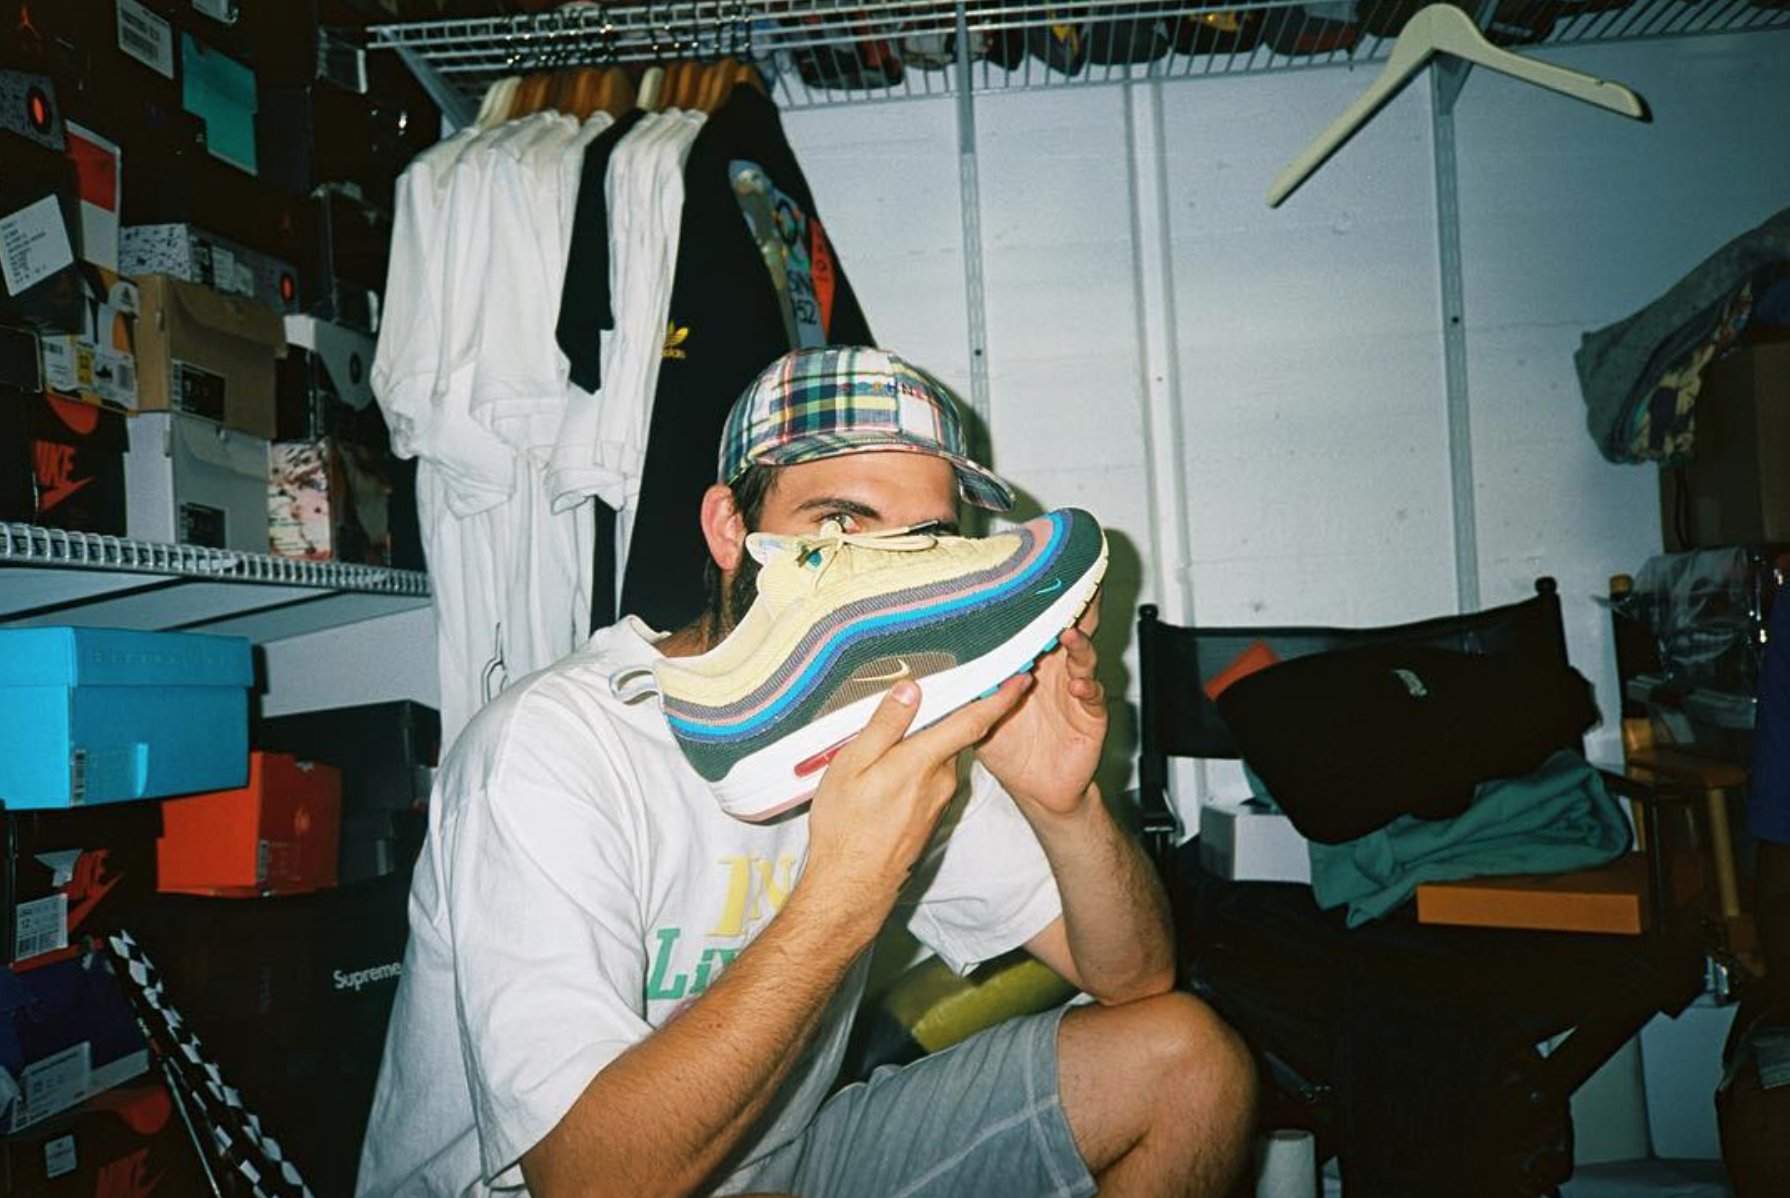 sean wotherspoon air max 97 stockx